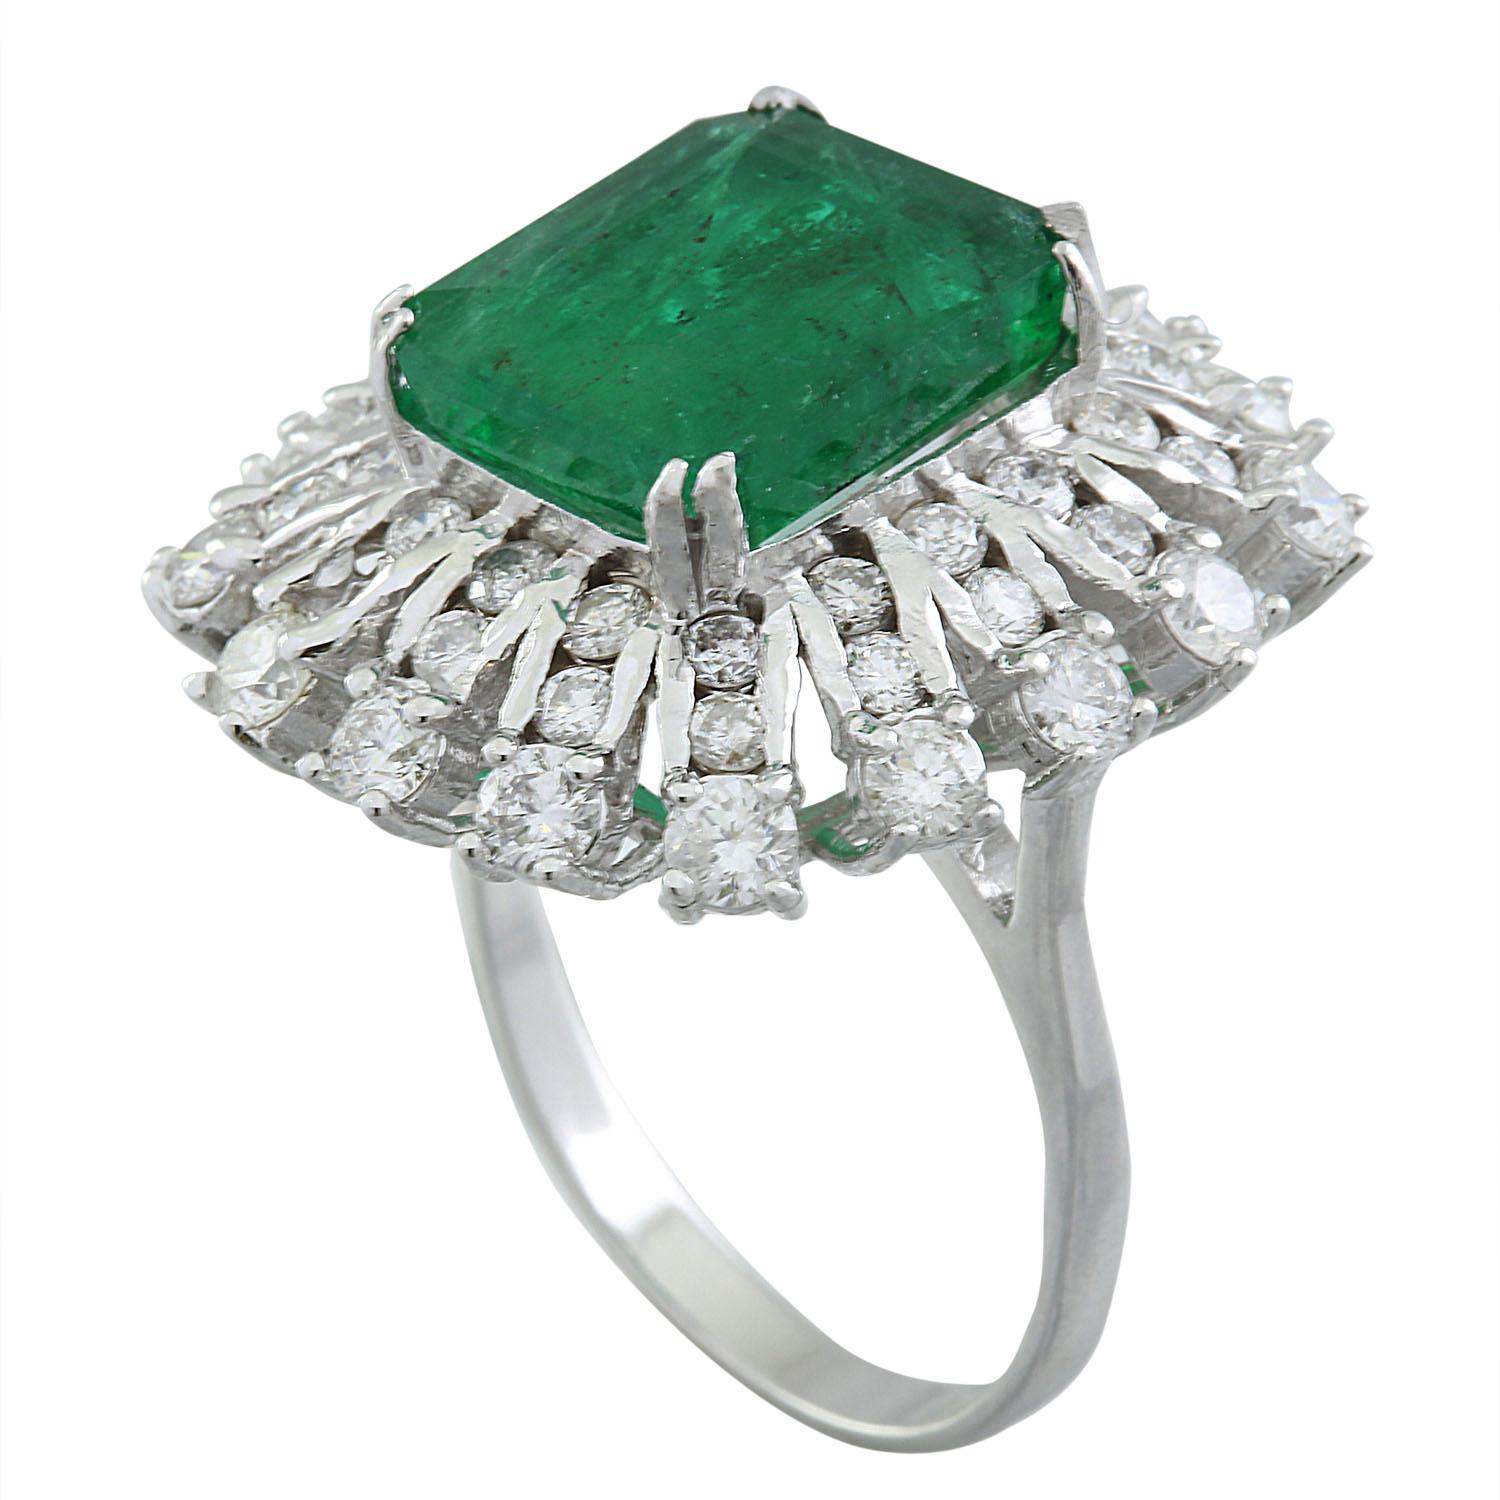 7.60 Carat Natural Emerald 14 Karat Solid White Gold Diamond Ring
Stamped: 14K 
Ring Size: 7 
Total Ring Weight: 8.5 Grams 
Emerald Weight: 5.60 Carat (12.00x10.00 Millimeter) 
Diamond Weight: 2.00 Carat (F-G Color, VS2-SI1 Clarity) 
Quantity: